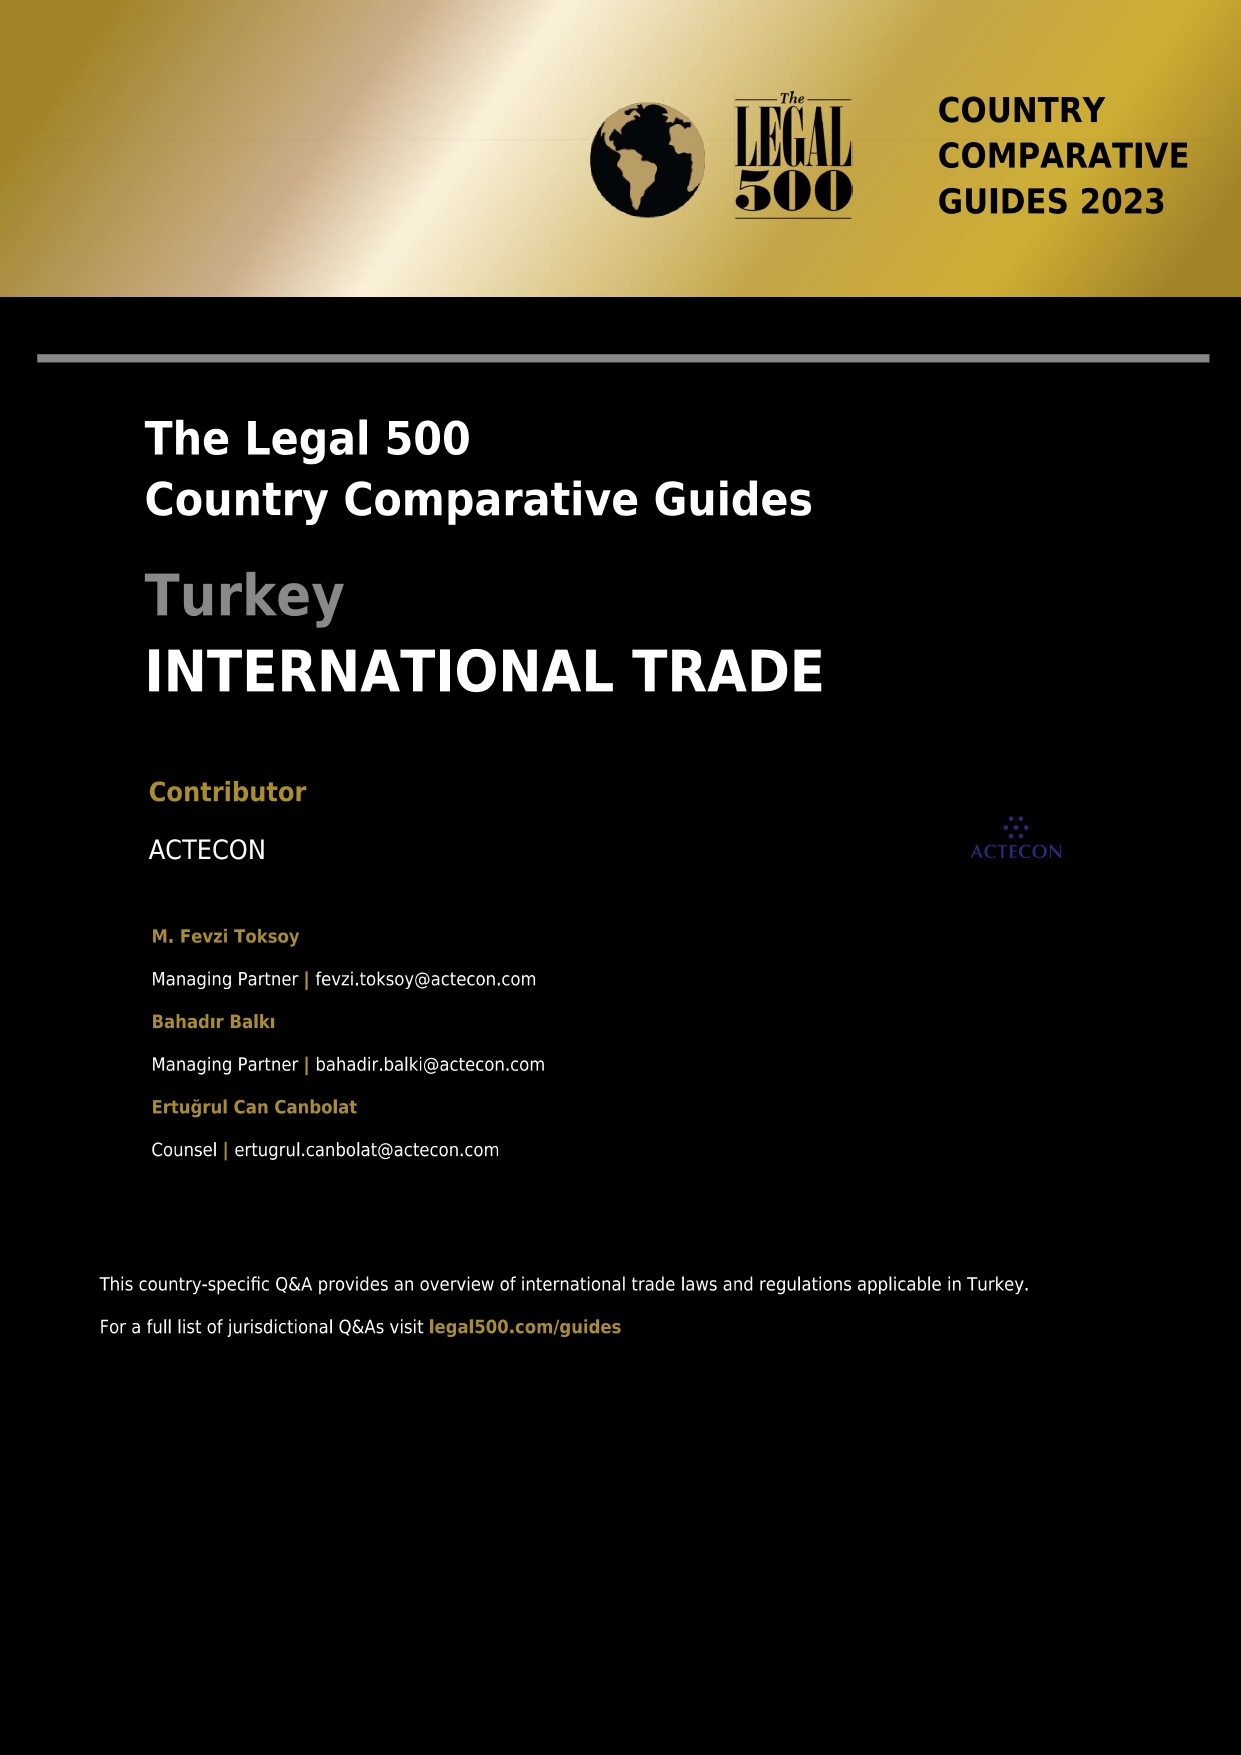 The Legal 500 Country Comparative Guides